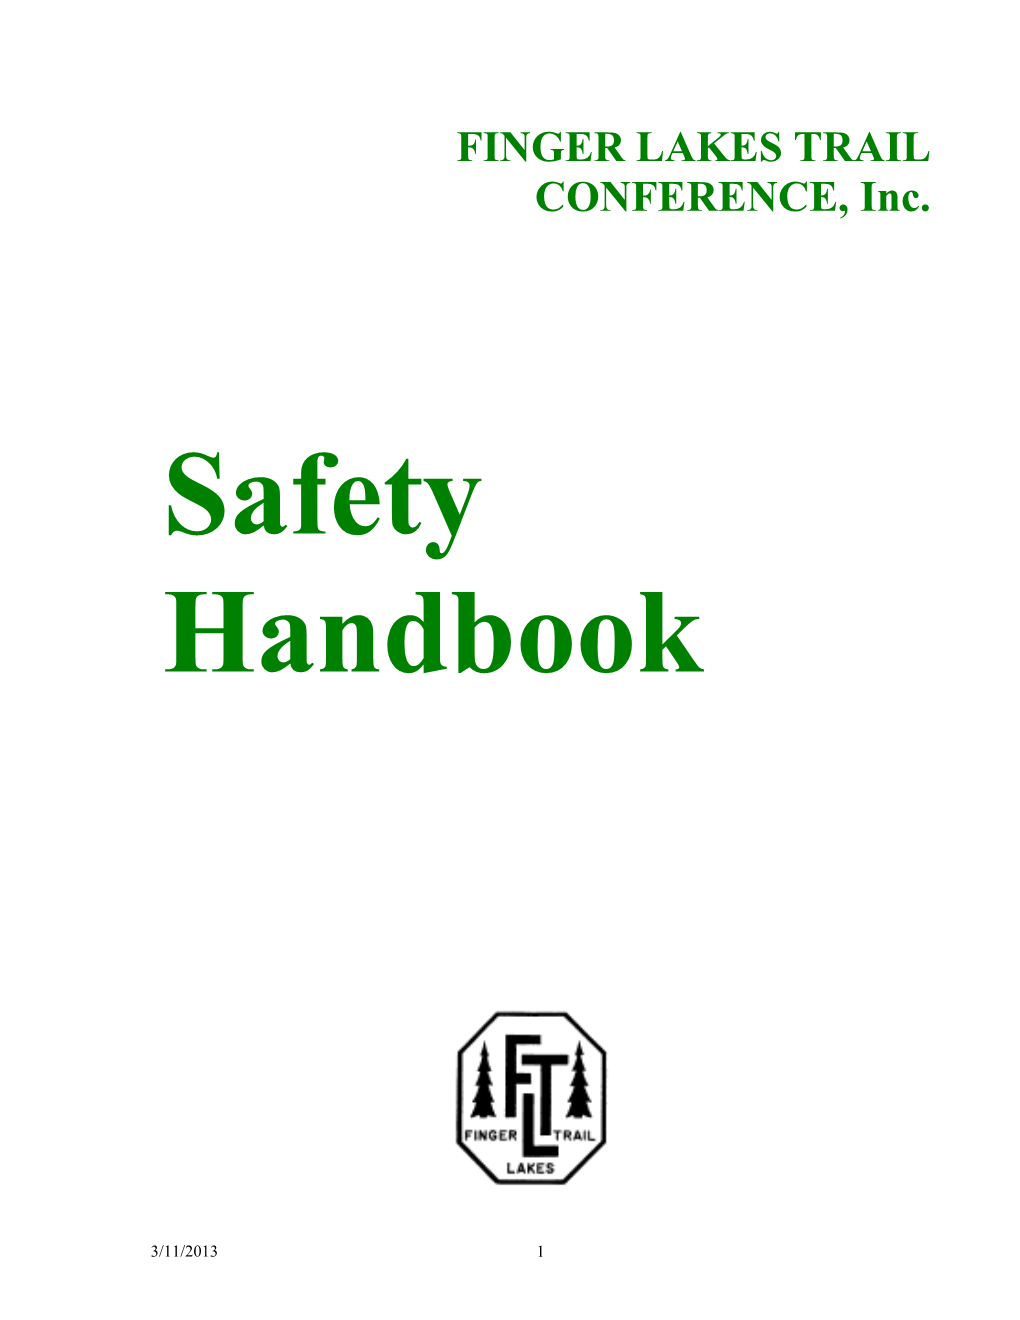 The Finger Lakes Trail Conference Has Had an Impressive Safety Record Over the Years